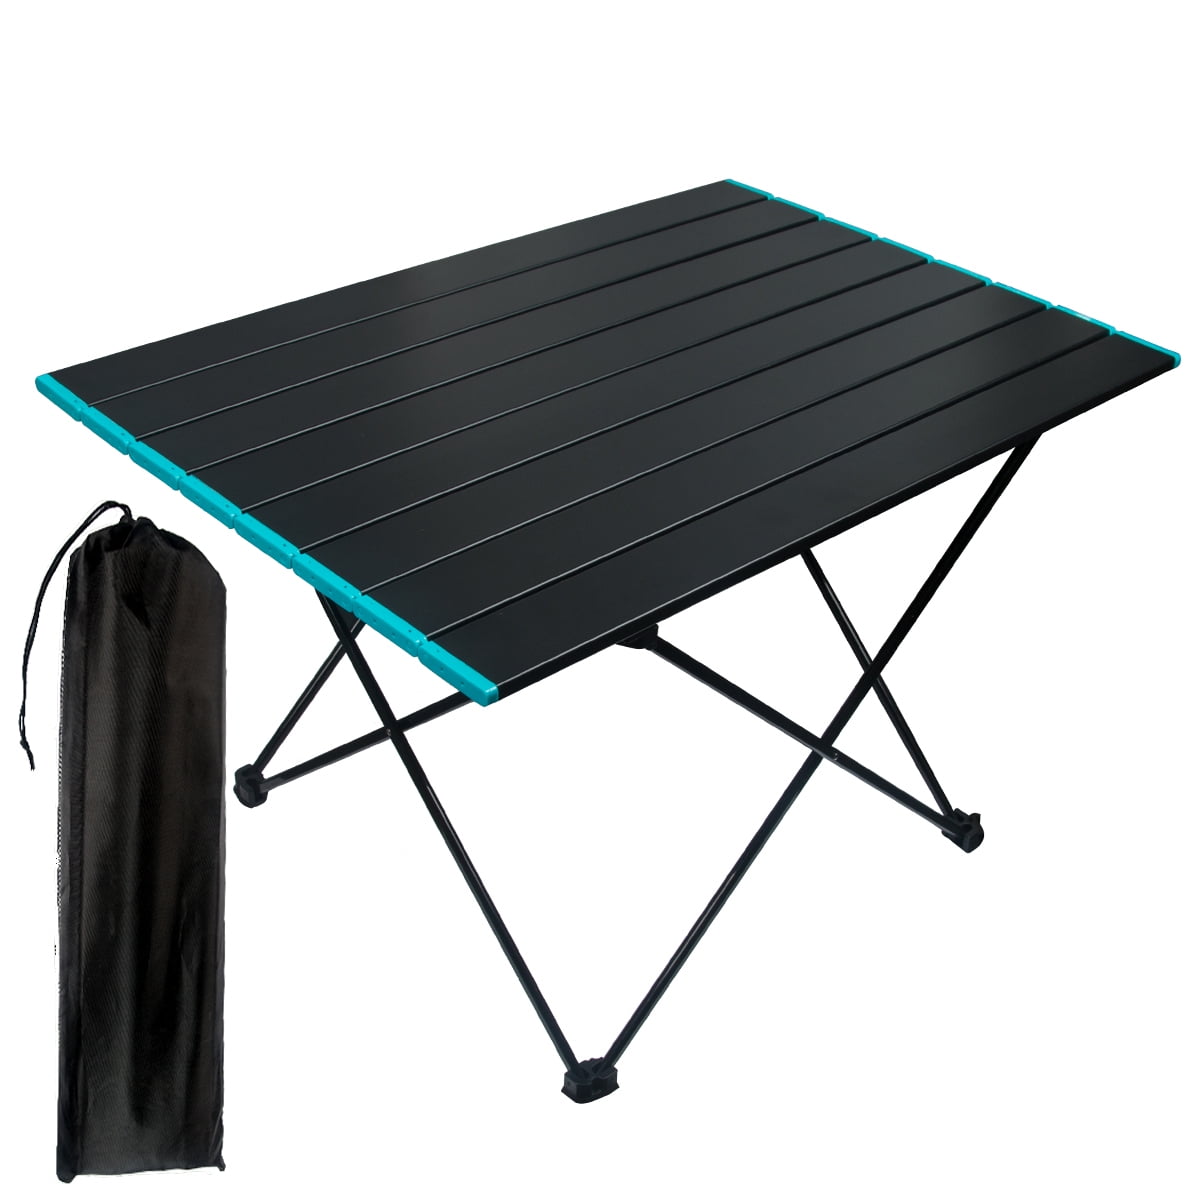 Aluminium Roll Up Table Folding Camping Outdoor Indoor Picnic With Carry Bag UK 